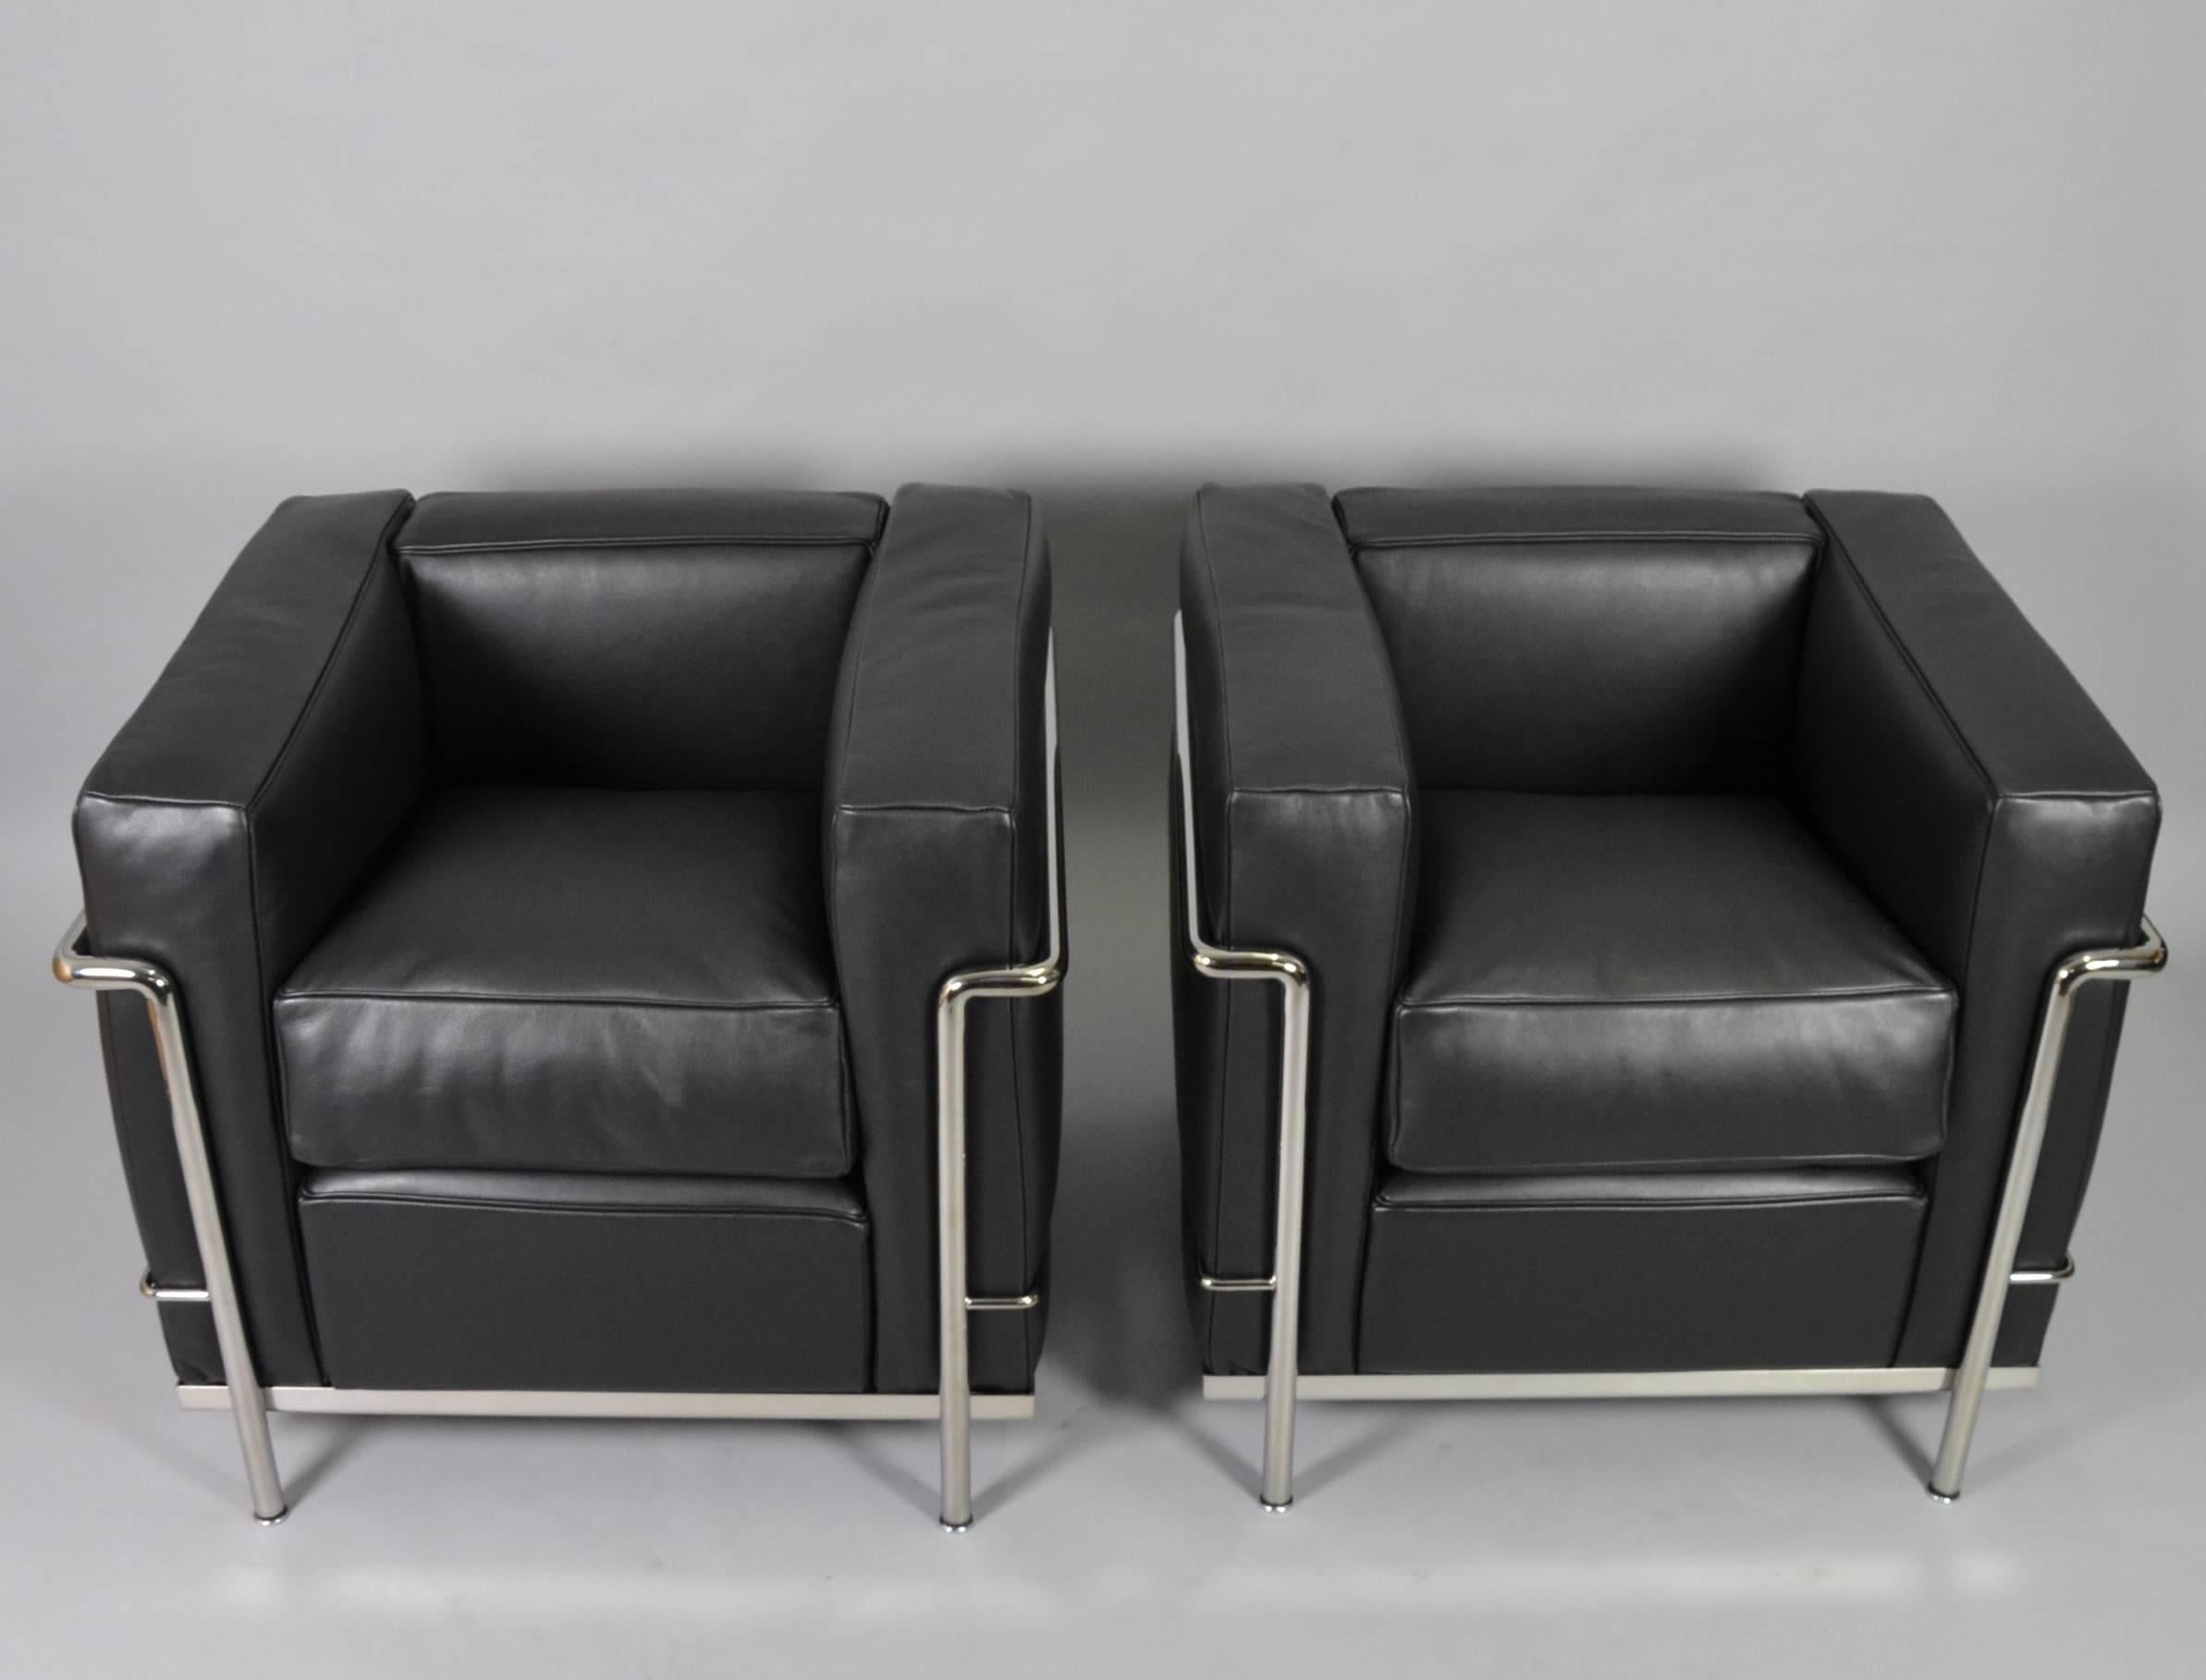 Designed by Le Corbusier, Pierre Jeanneret and Charlotte Perriand in 1928. Produced and signed by Cassina. Stainless steel with cushions in black leather.
Brand new chairs in original box.